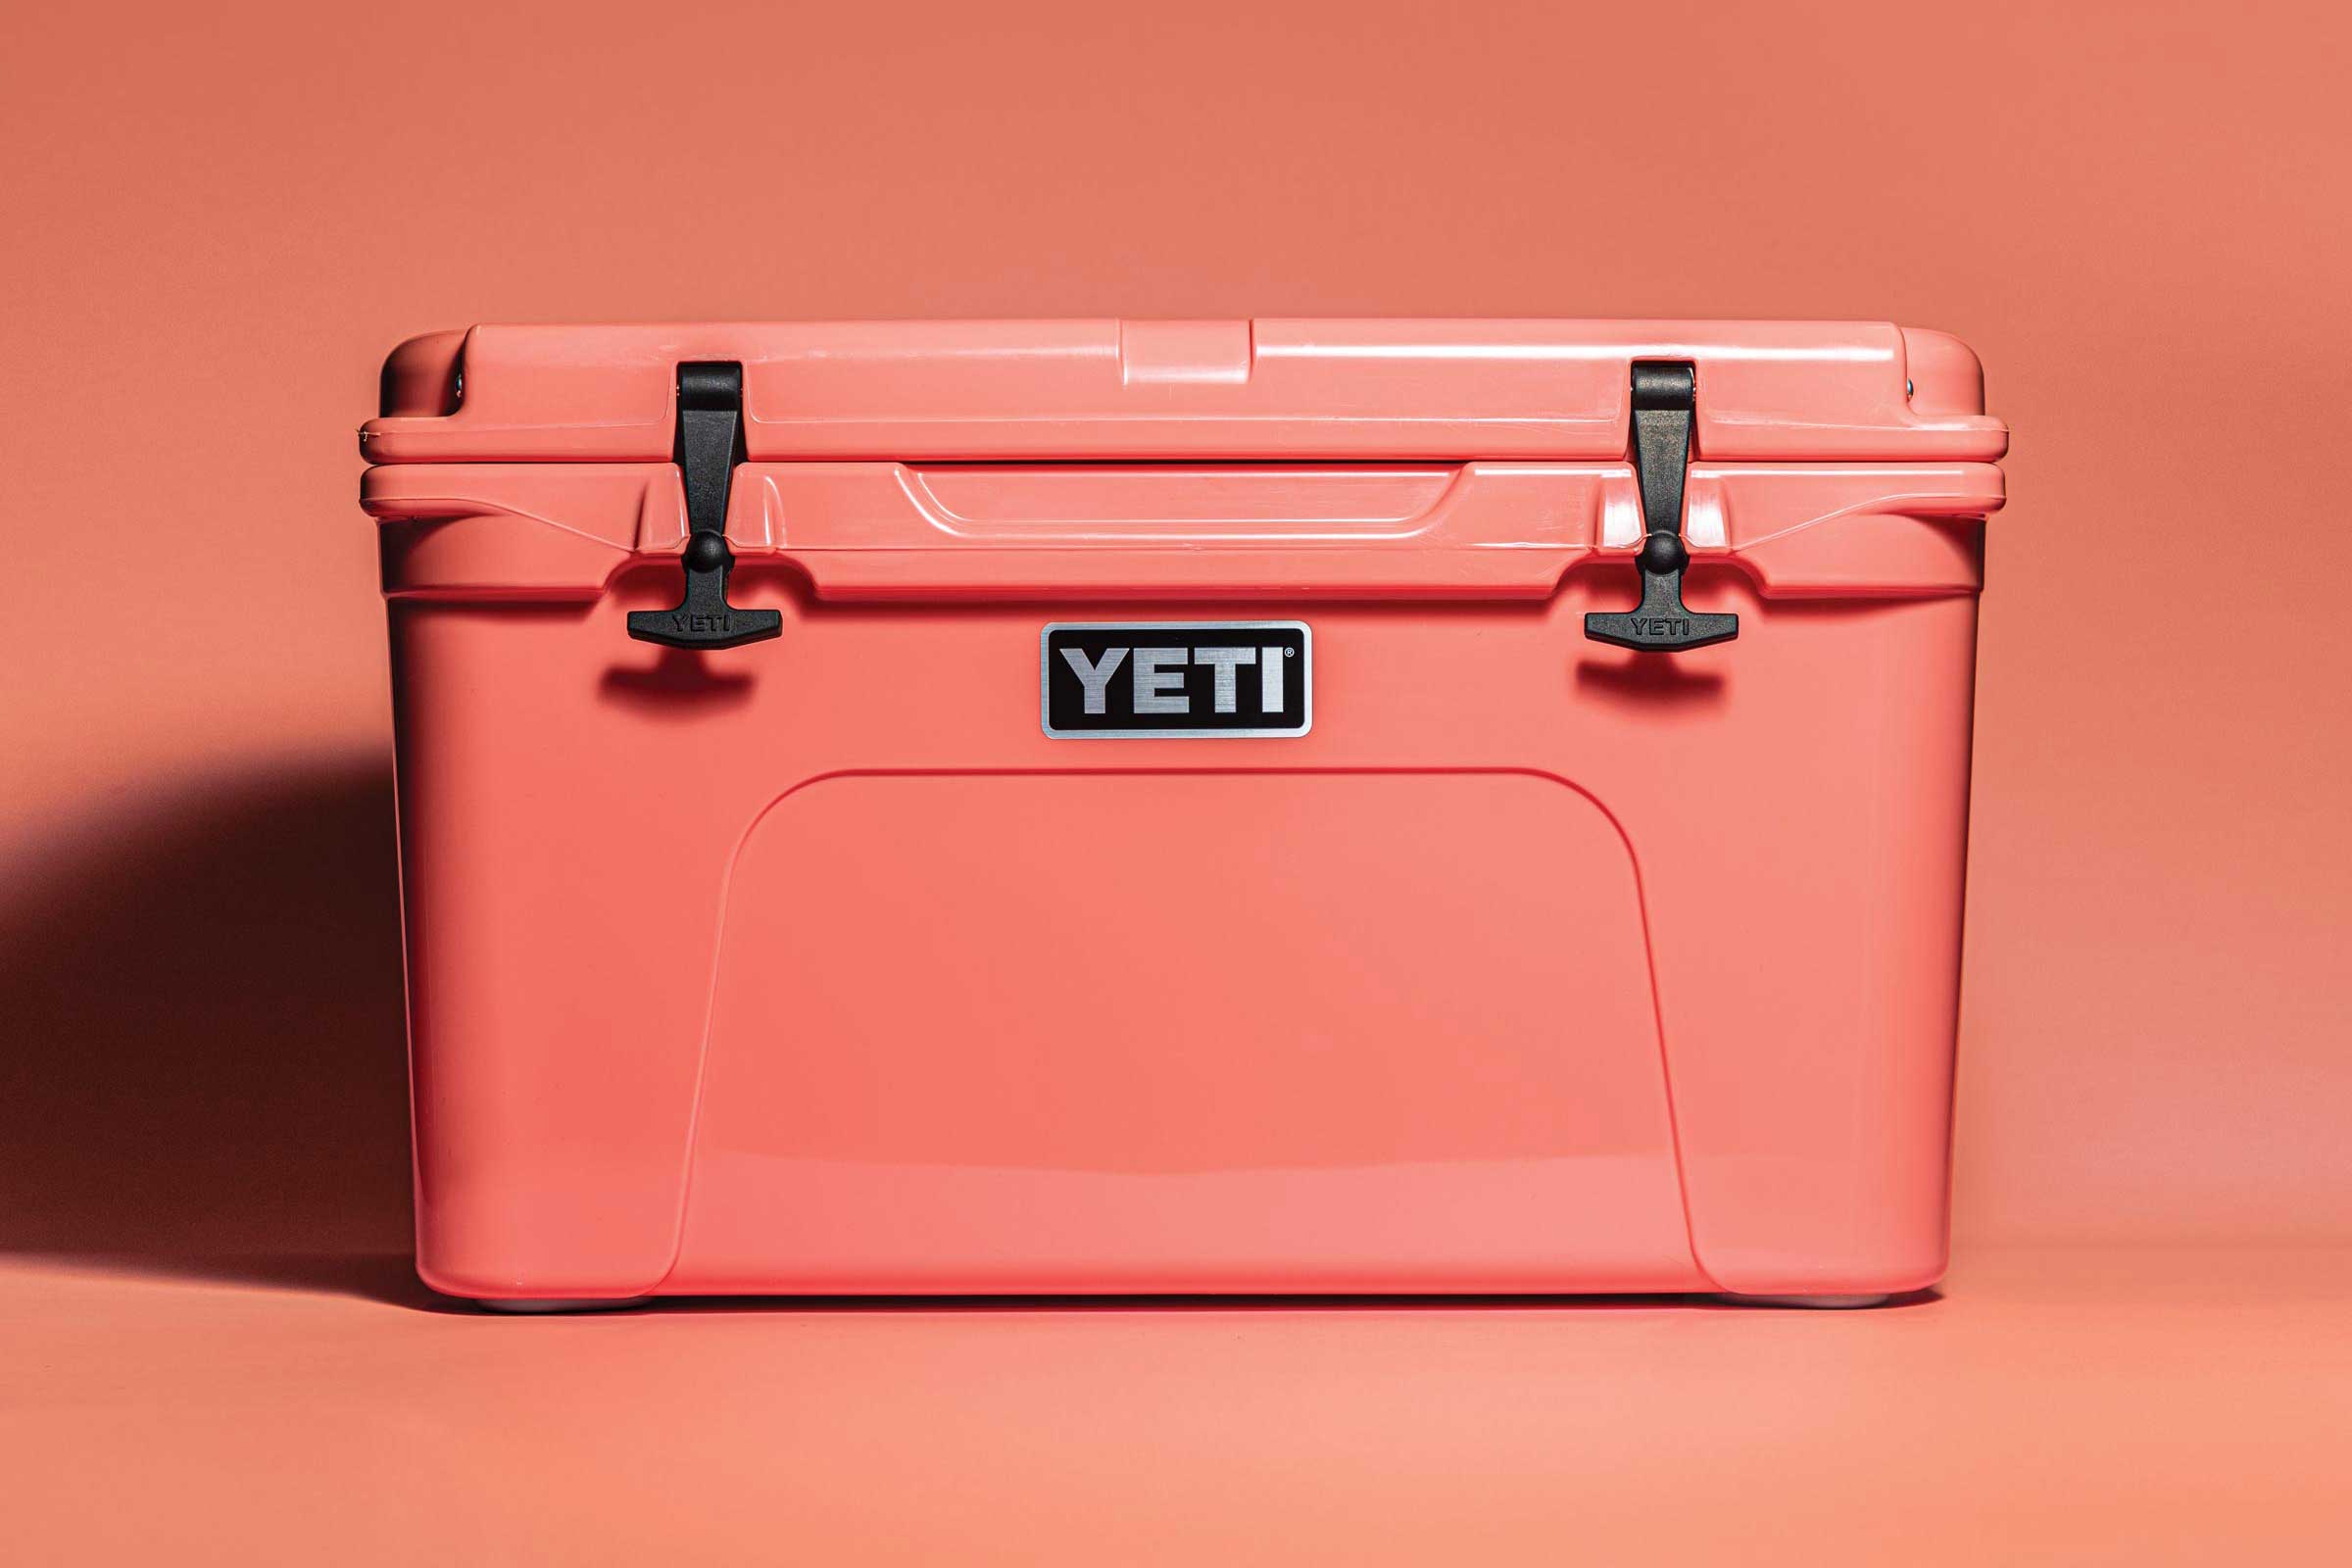 Yeti Cooler Cushions - Comfort for Your Adventure